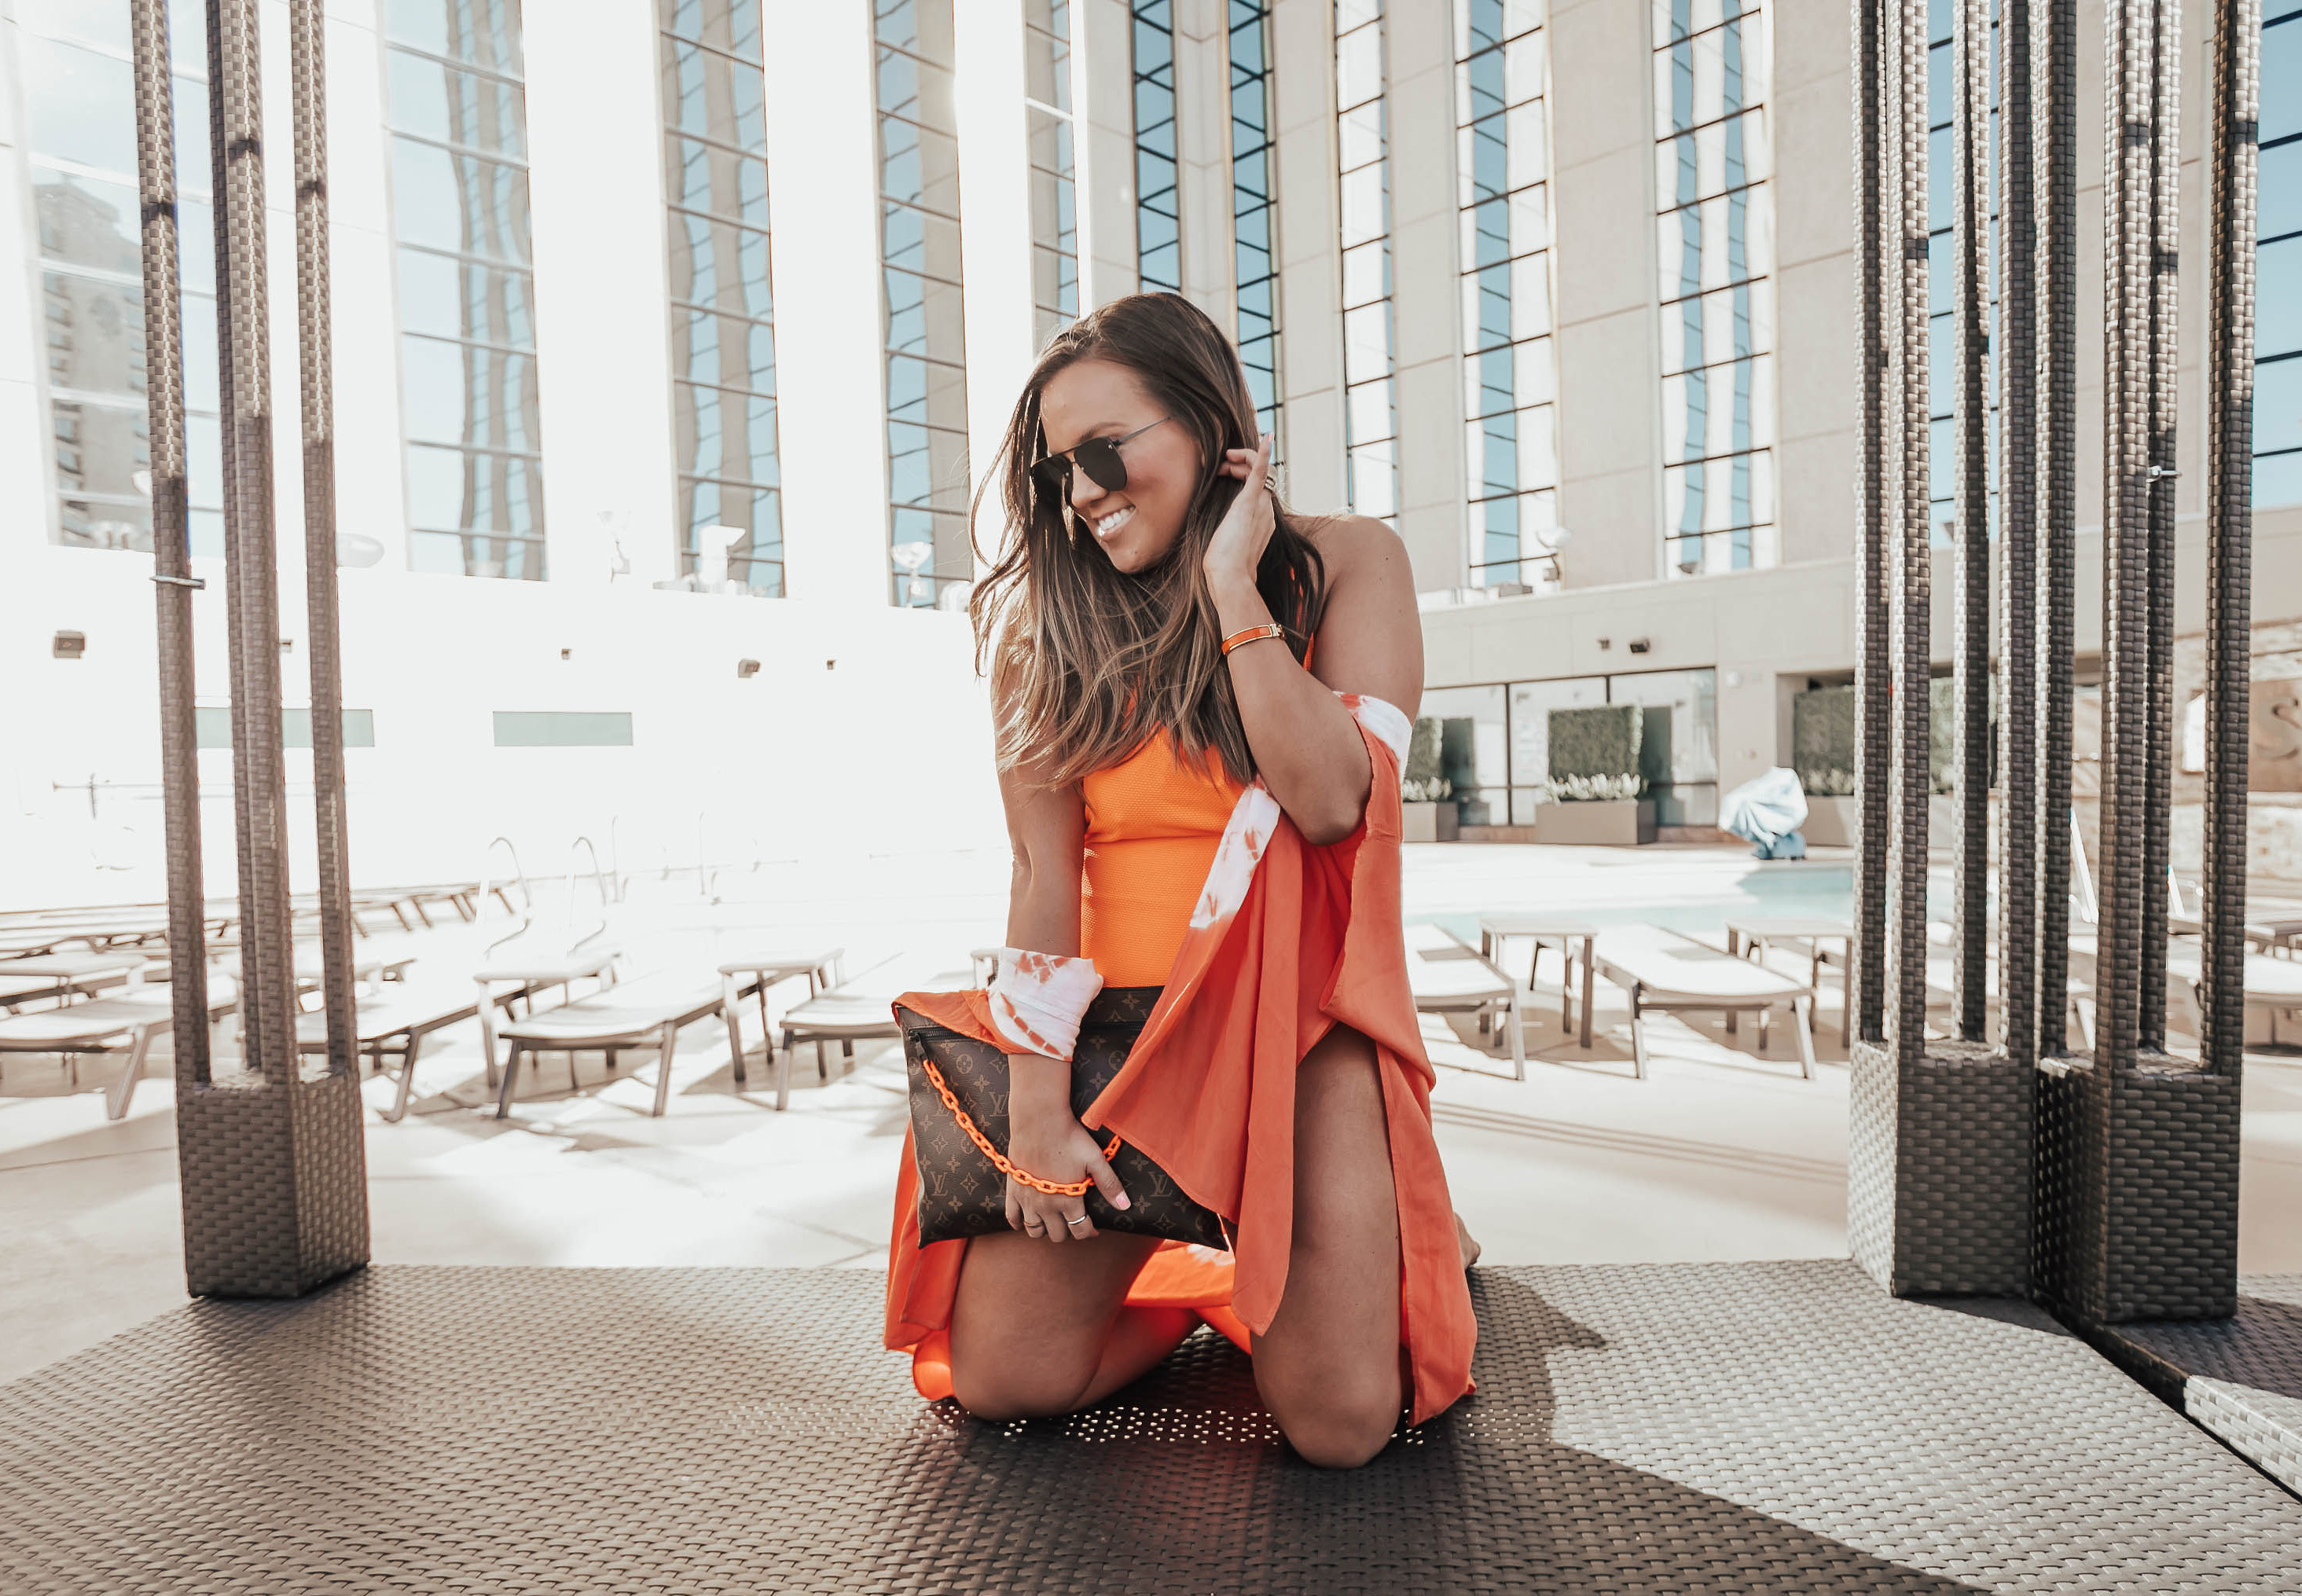 Reno Nevada Bloggers, Emily Farren Wieczorek and Ashley Zeal of Two Peas in a Prada talk all about Ashley's Bachelorette Party weekend at The Row Reno.